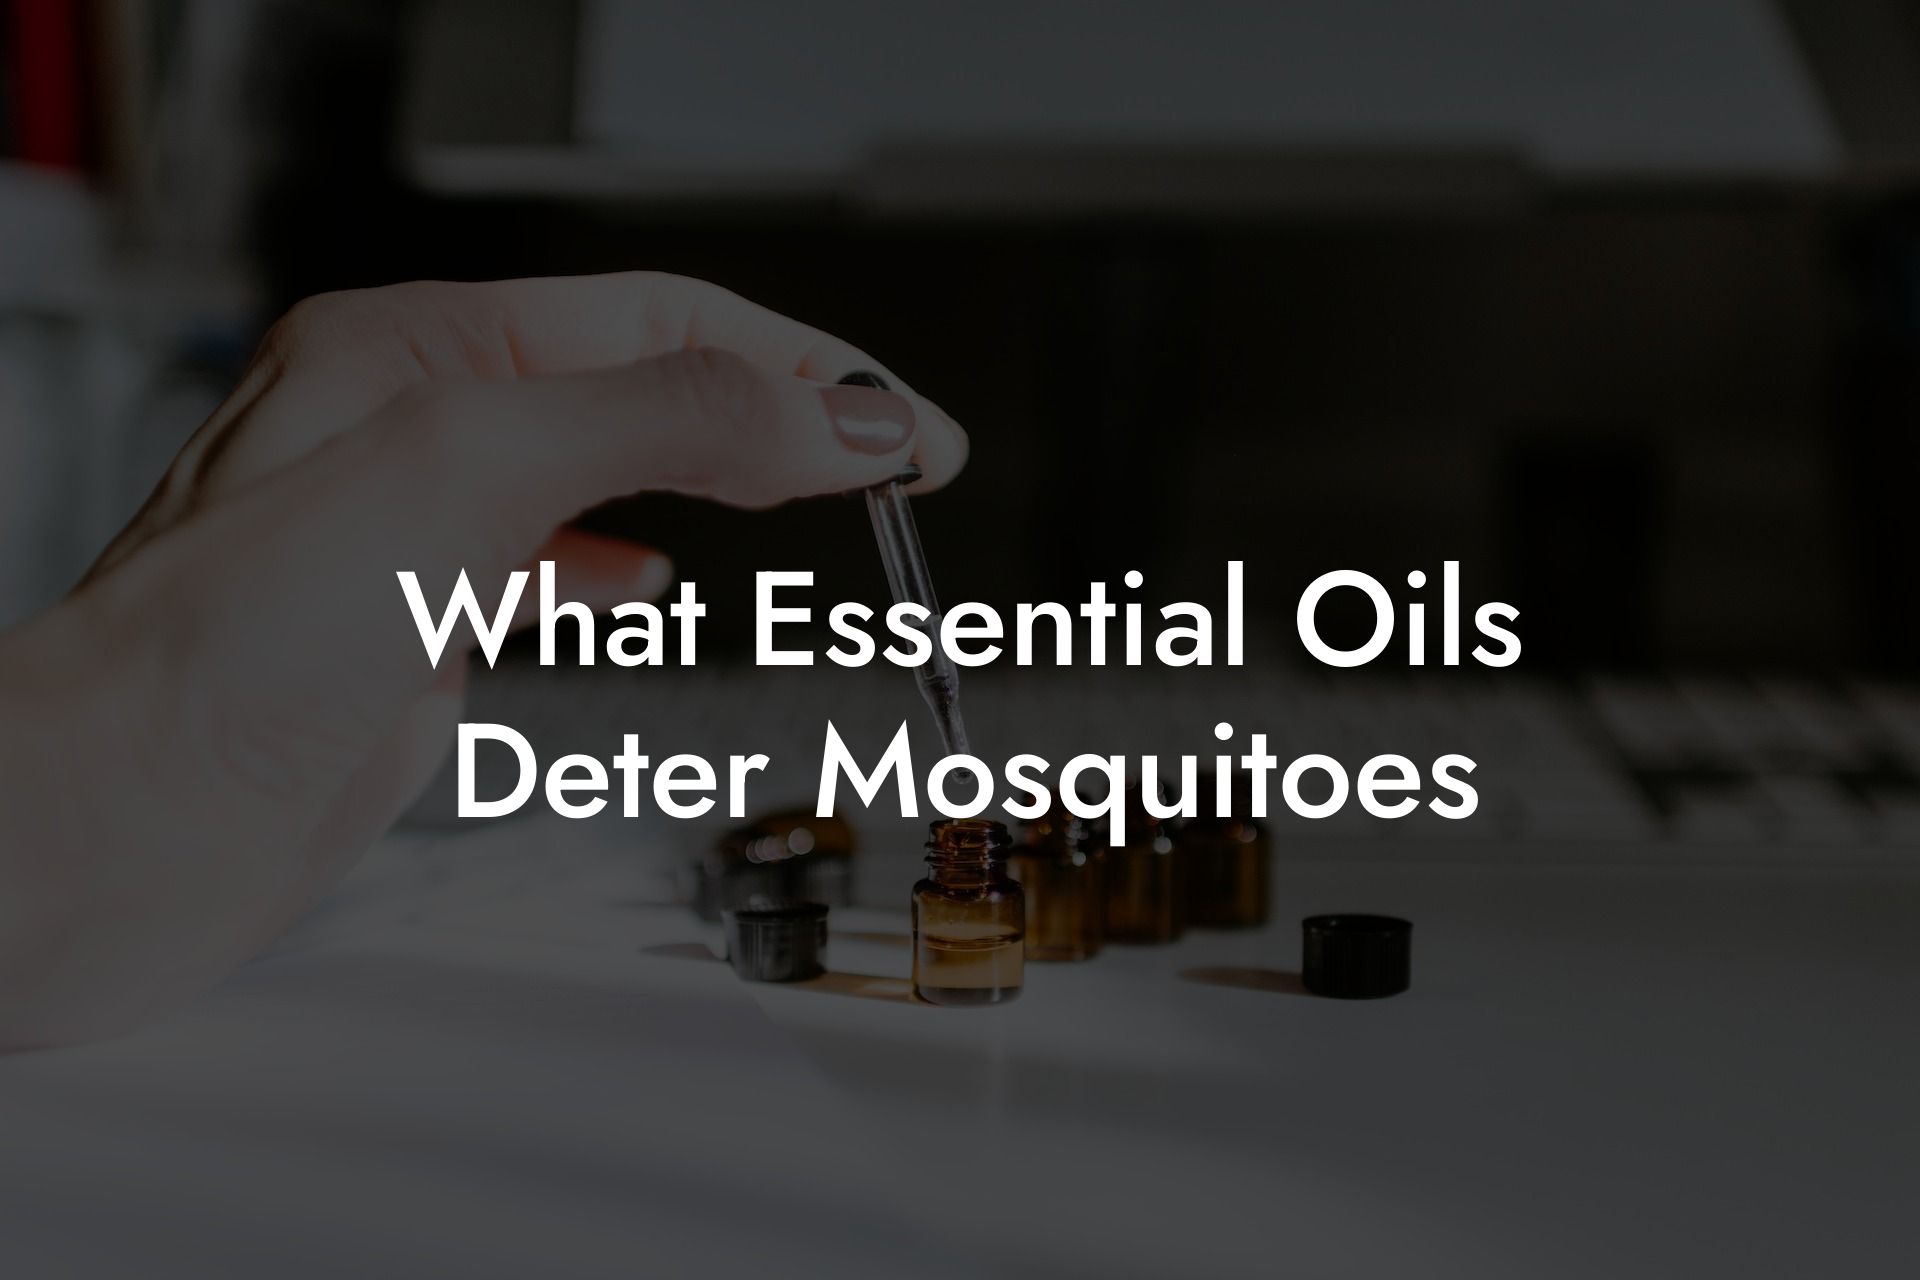 What Essential Oils Deter Mosquitoes